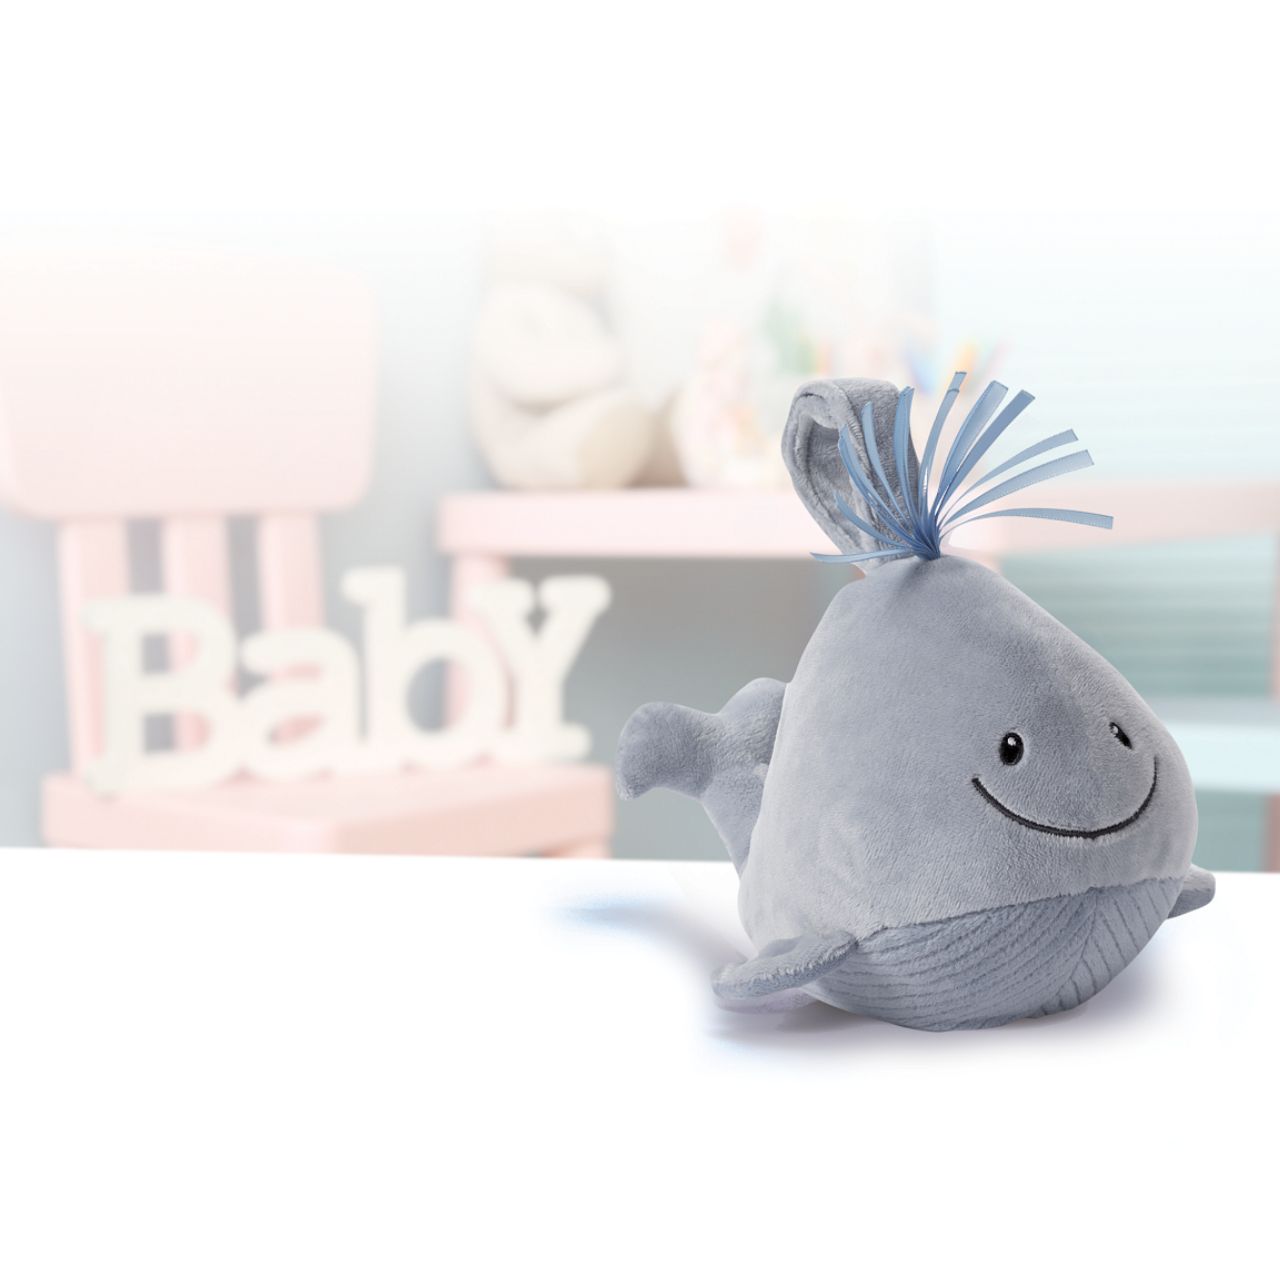 GUND Baby Sleepy Seas Light & Sound Whale - Small  This musical plush toy will help your babies drift off to sleep. The whale is presented in an oh-so-soft light blue fabric, with blue ribbons for its hair, and dark embroidery creating a smiling face. Press the left fin and the animated whale splashes into life. Press the musical note on its right fin and the plush starts to play one of five different noises: